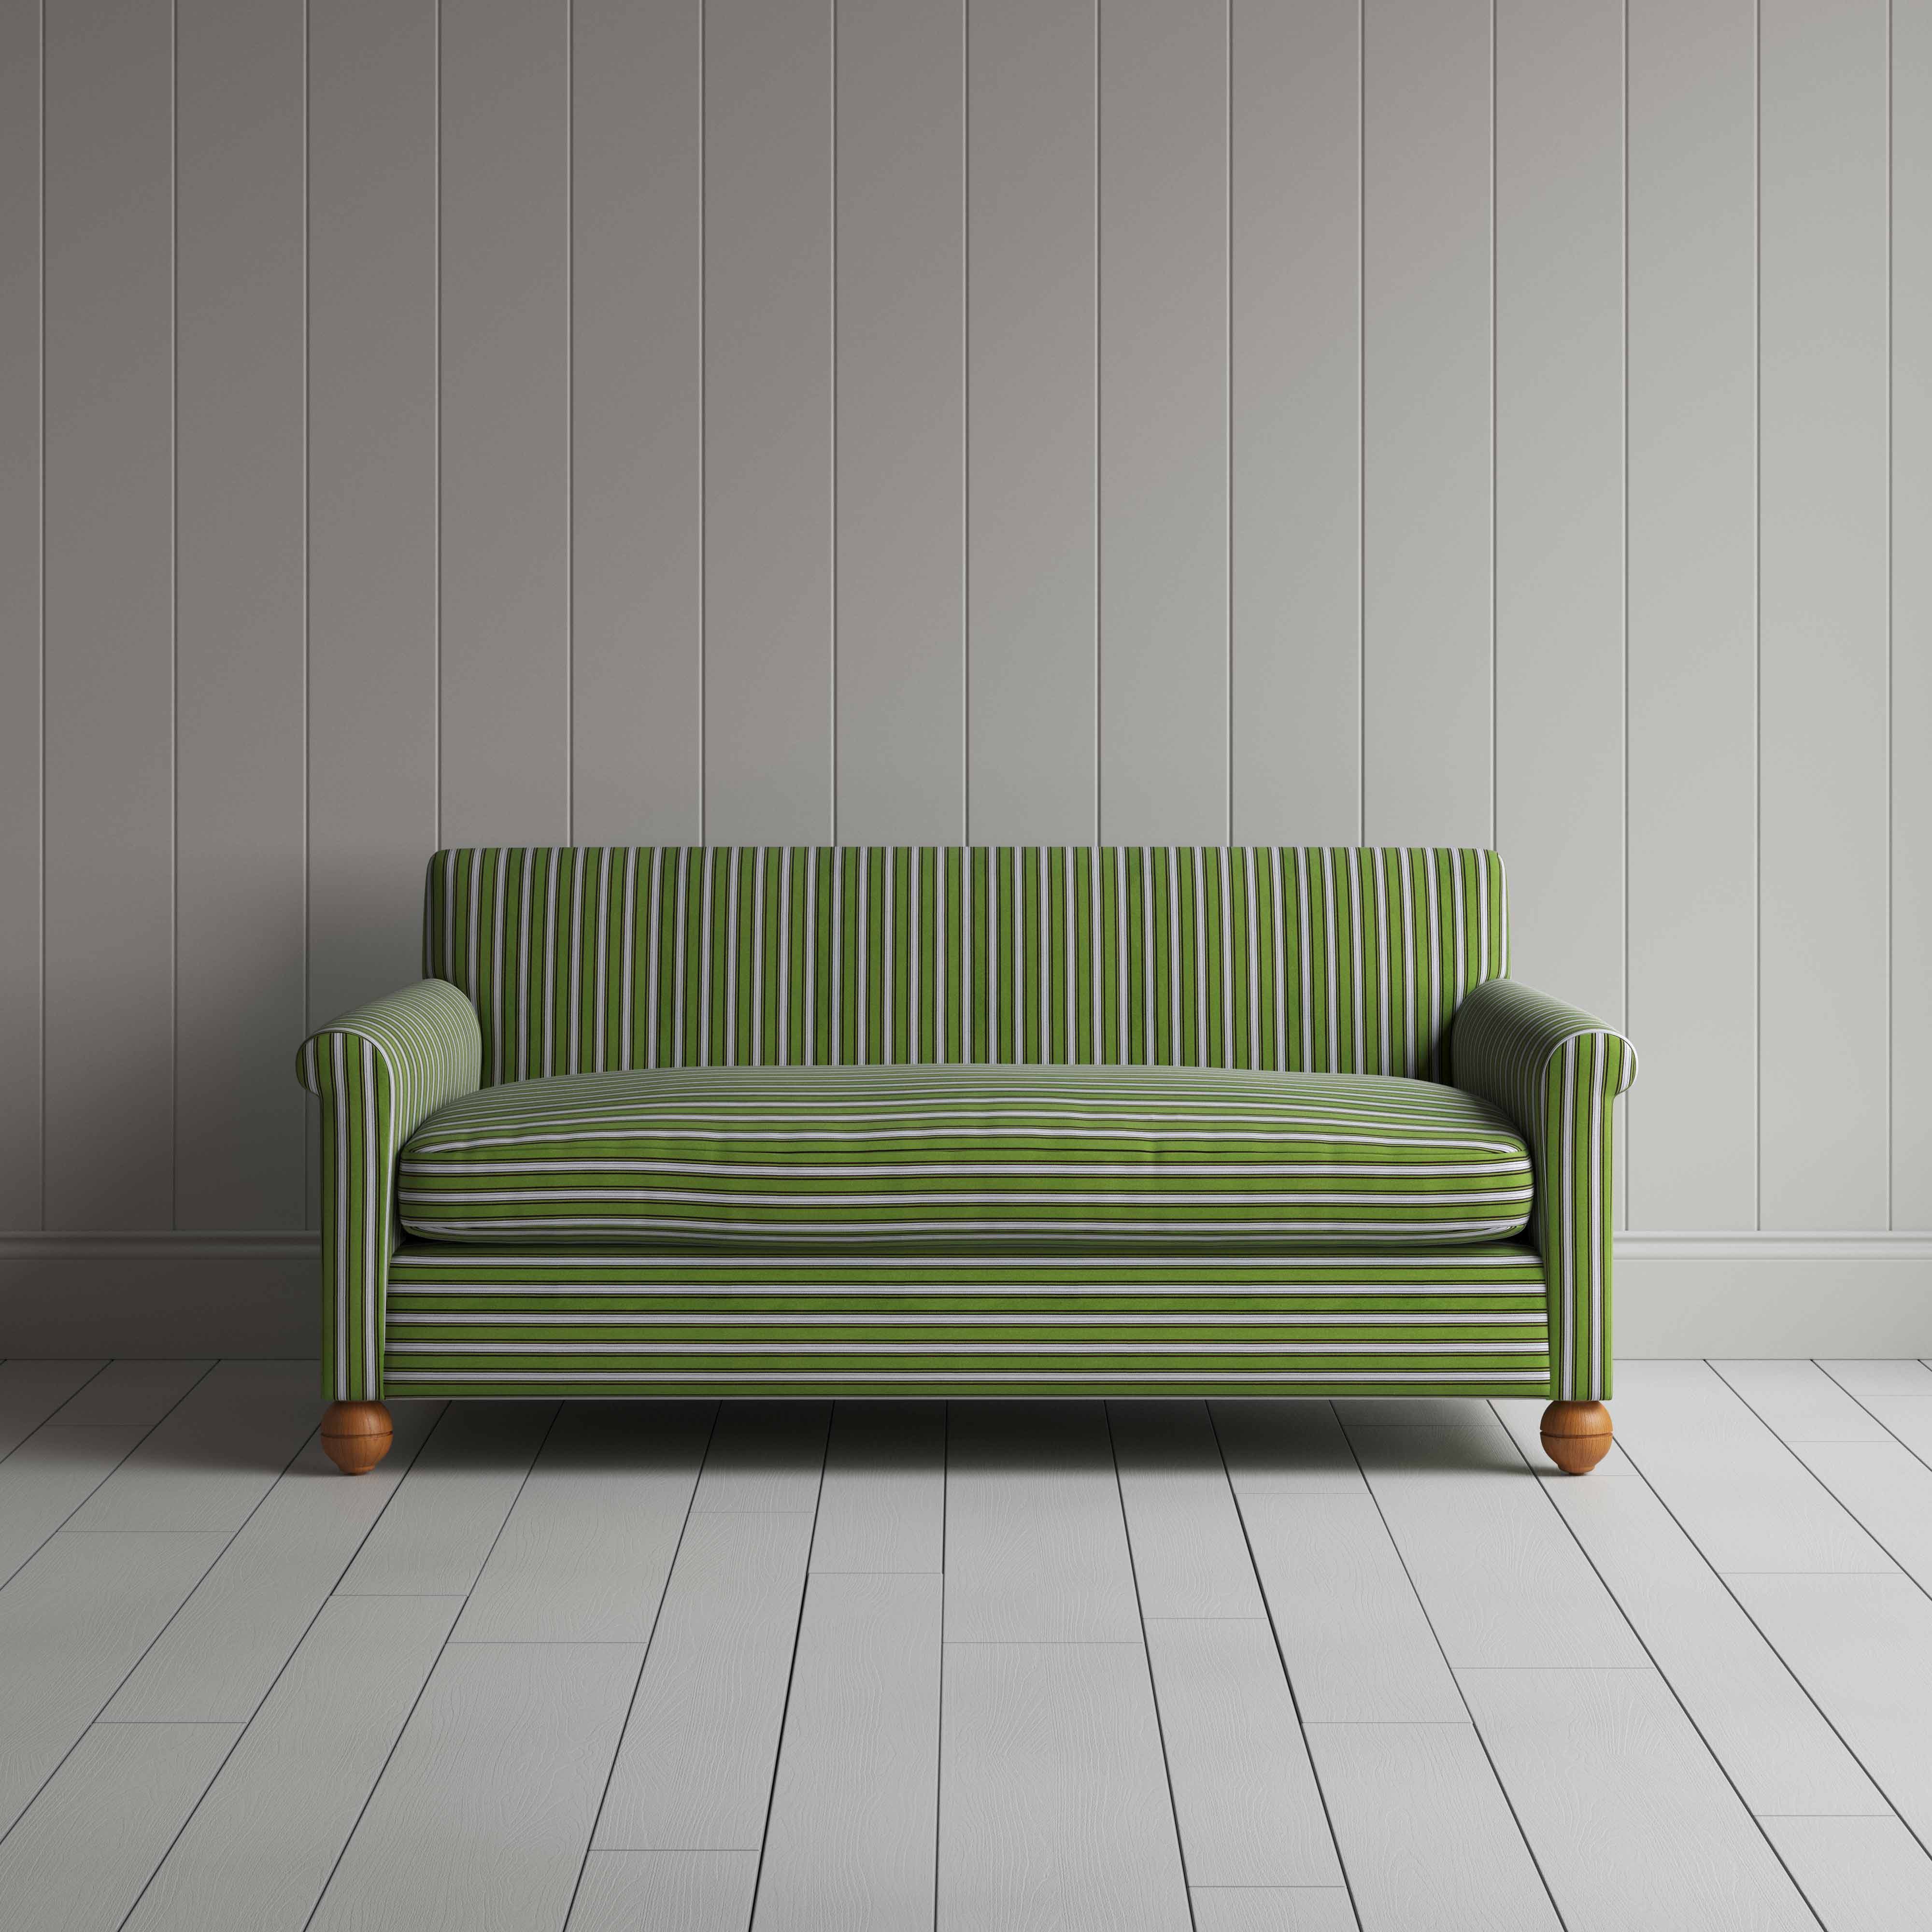  Idler 3 Seater Sofa in Colonnade Cotton, Green and Wine 